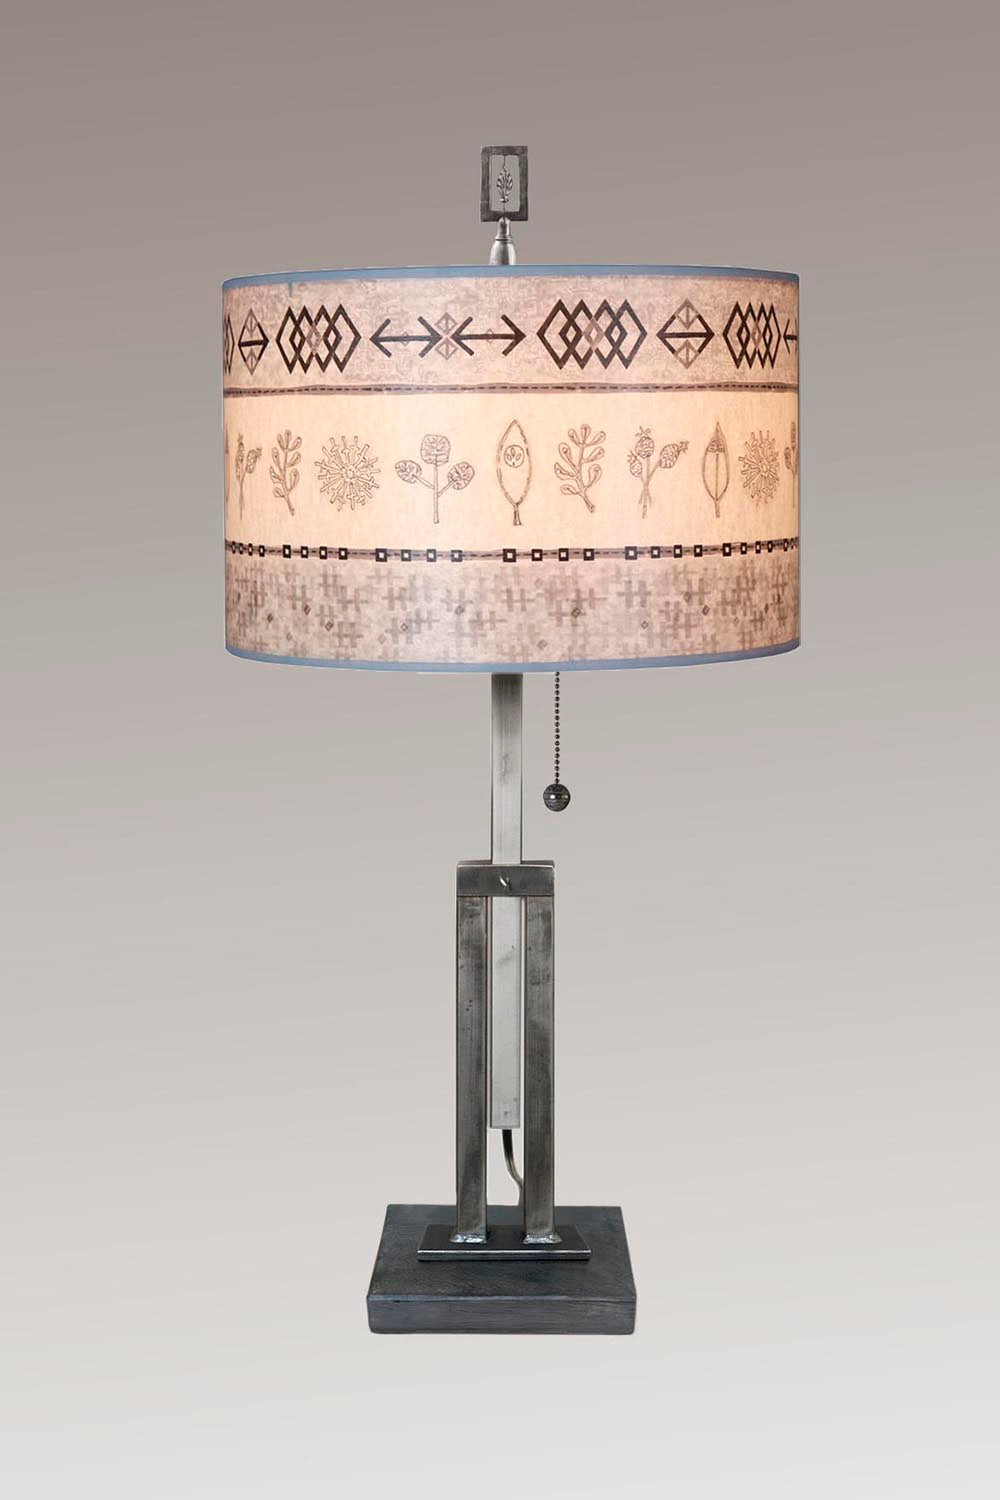 Janna Ugone &amp; Co Table Lamps Adjustable-Height Steel Table Lamp with Large Drum Shade in Wovens &amp; Spring in Mist